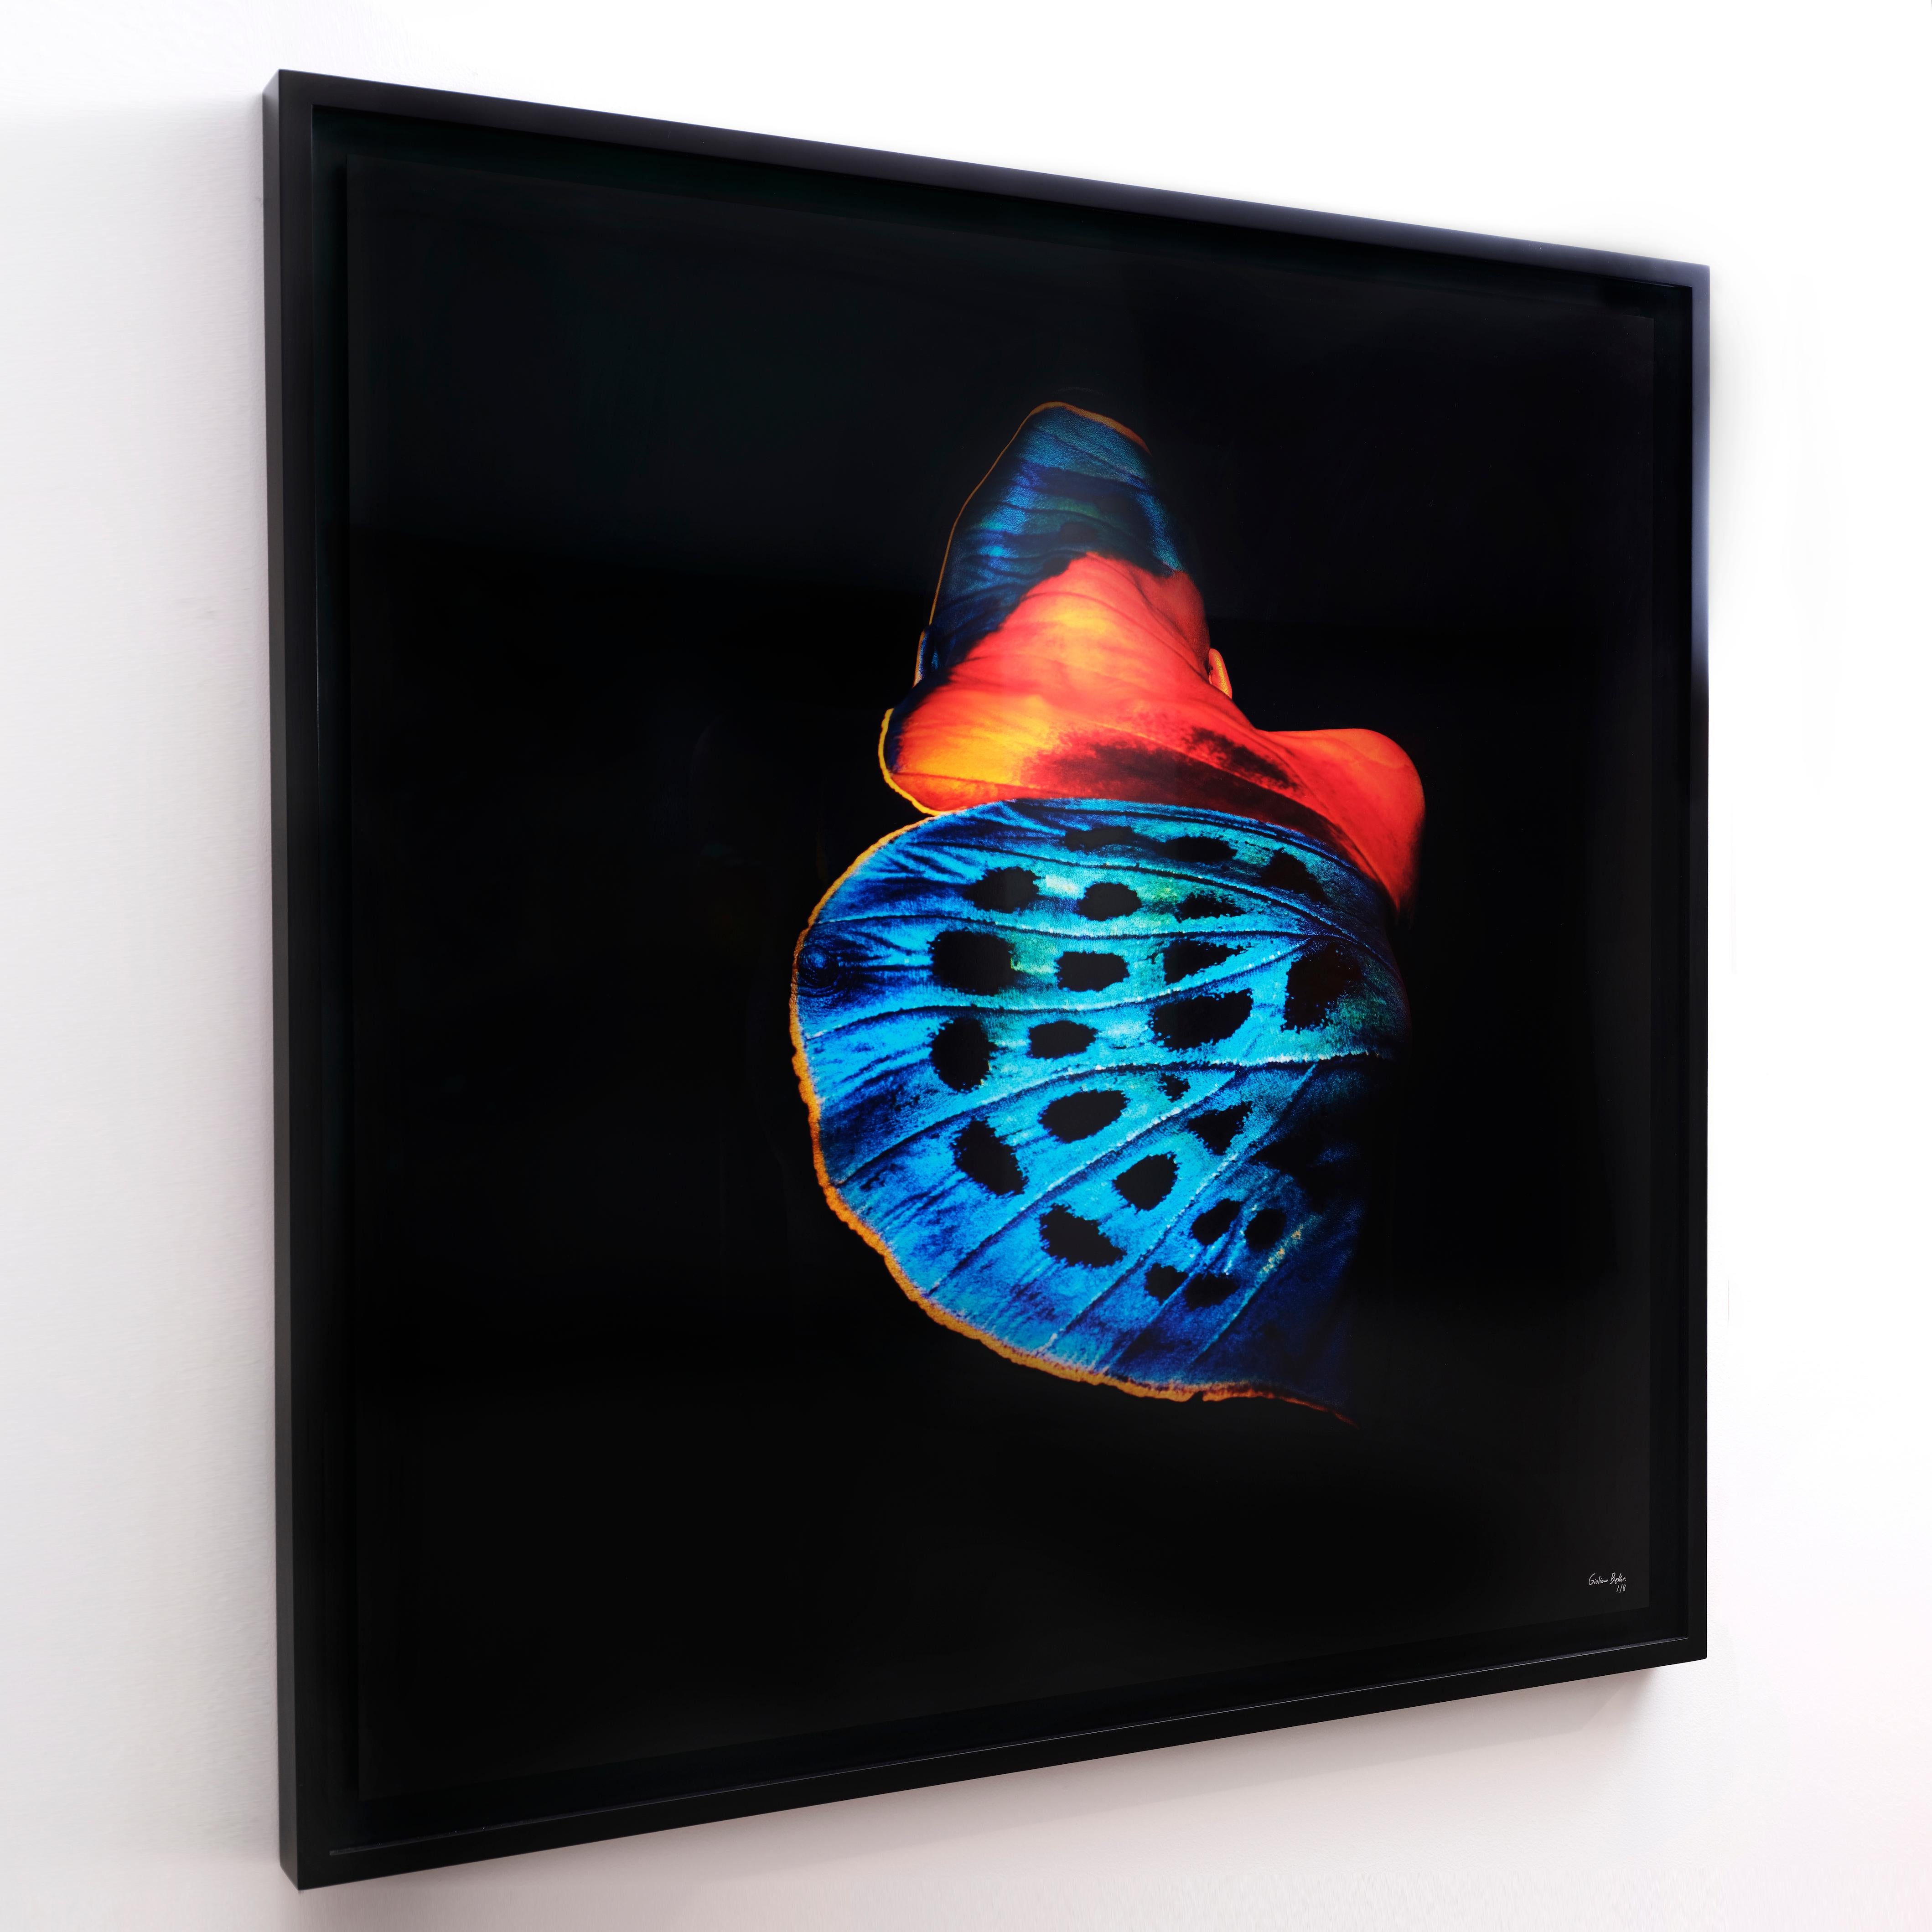 "Butterfly 13" (FRAMED) Photography 40" x 40" in Edition 1/8 by Giuliano Bekor

Title: Butterfly B13
Year: 2018
Print size: 40" x 40" Inch
Framed size: 42" x 42" Inch 
Edition: 1/8
Artist proof: 2

Medium:  
The artwork is printed on Archival fine